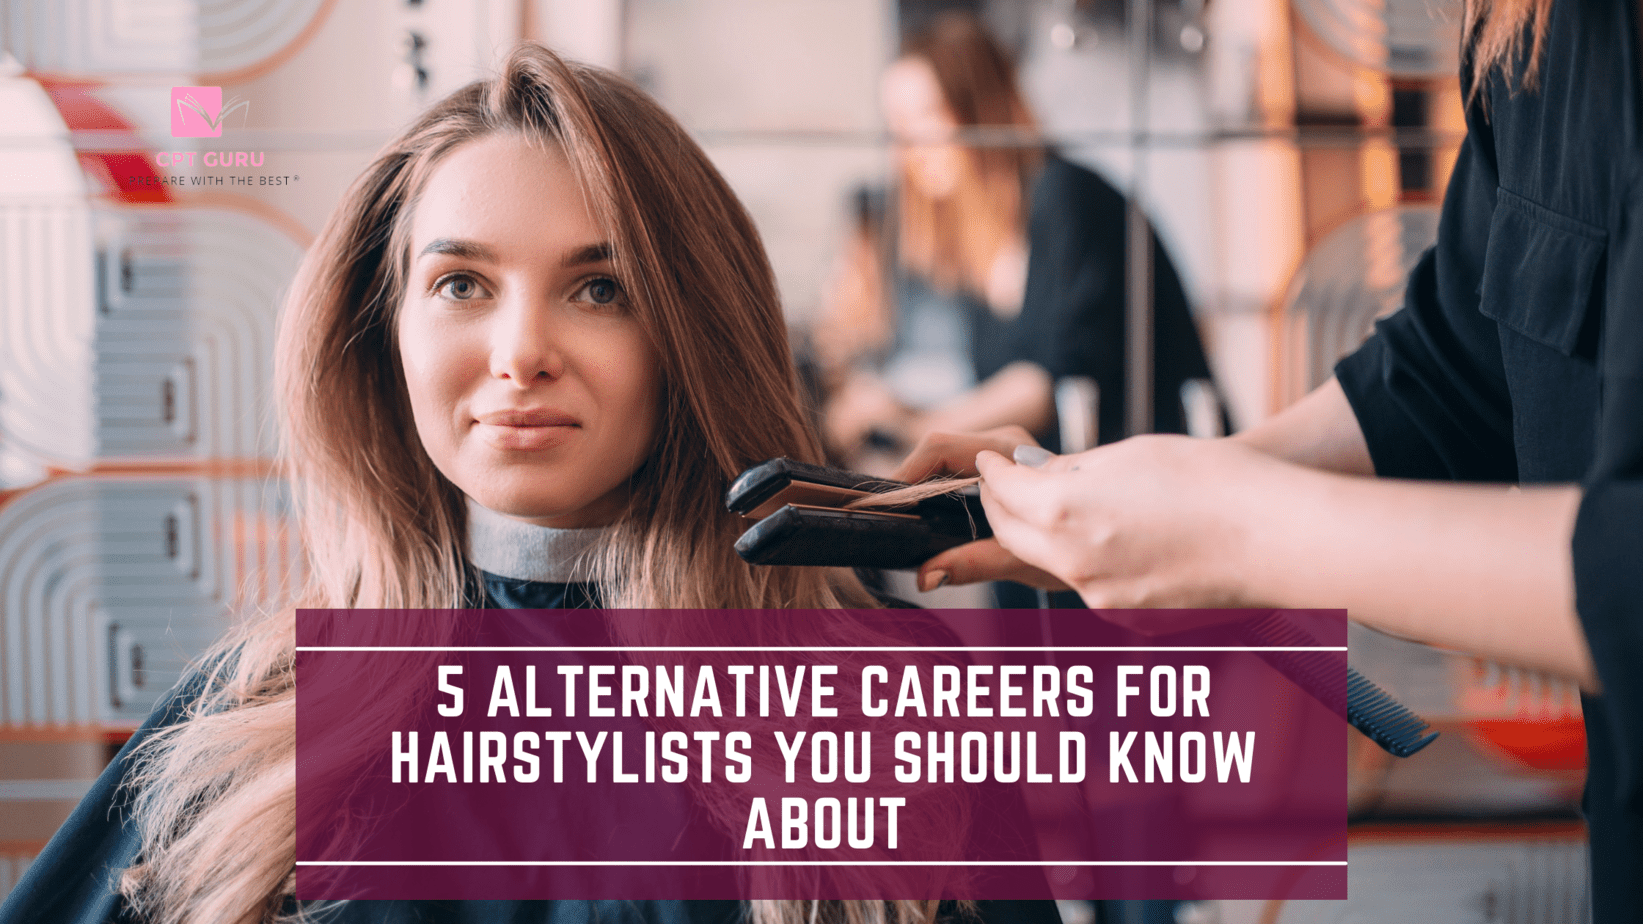 5 Alternative Careers for Hairstylists You Should Know About